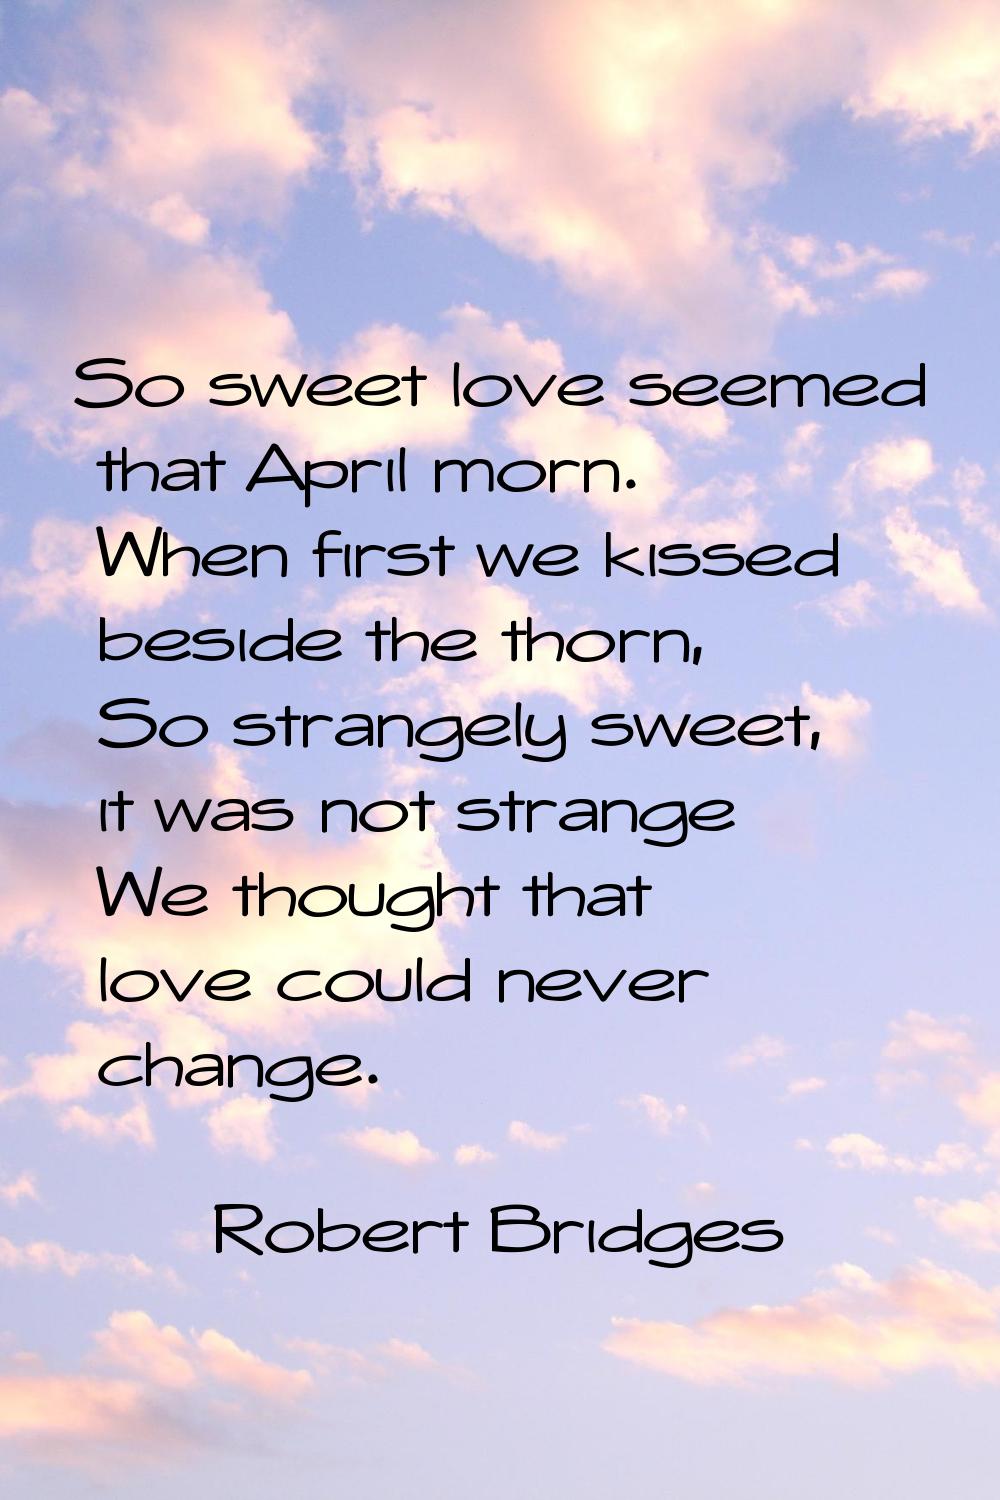 So sweet love seemed that April morn. When first we kissed beside the thorn, So strangely sweet, it